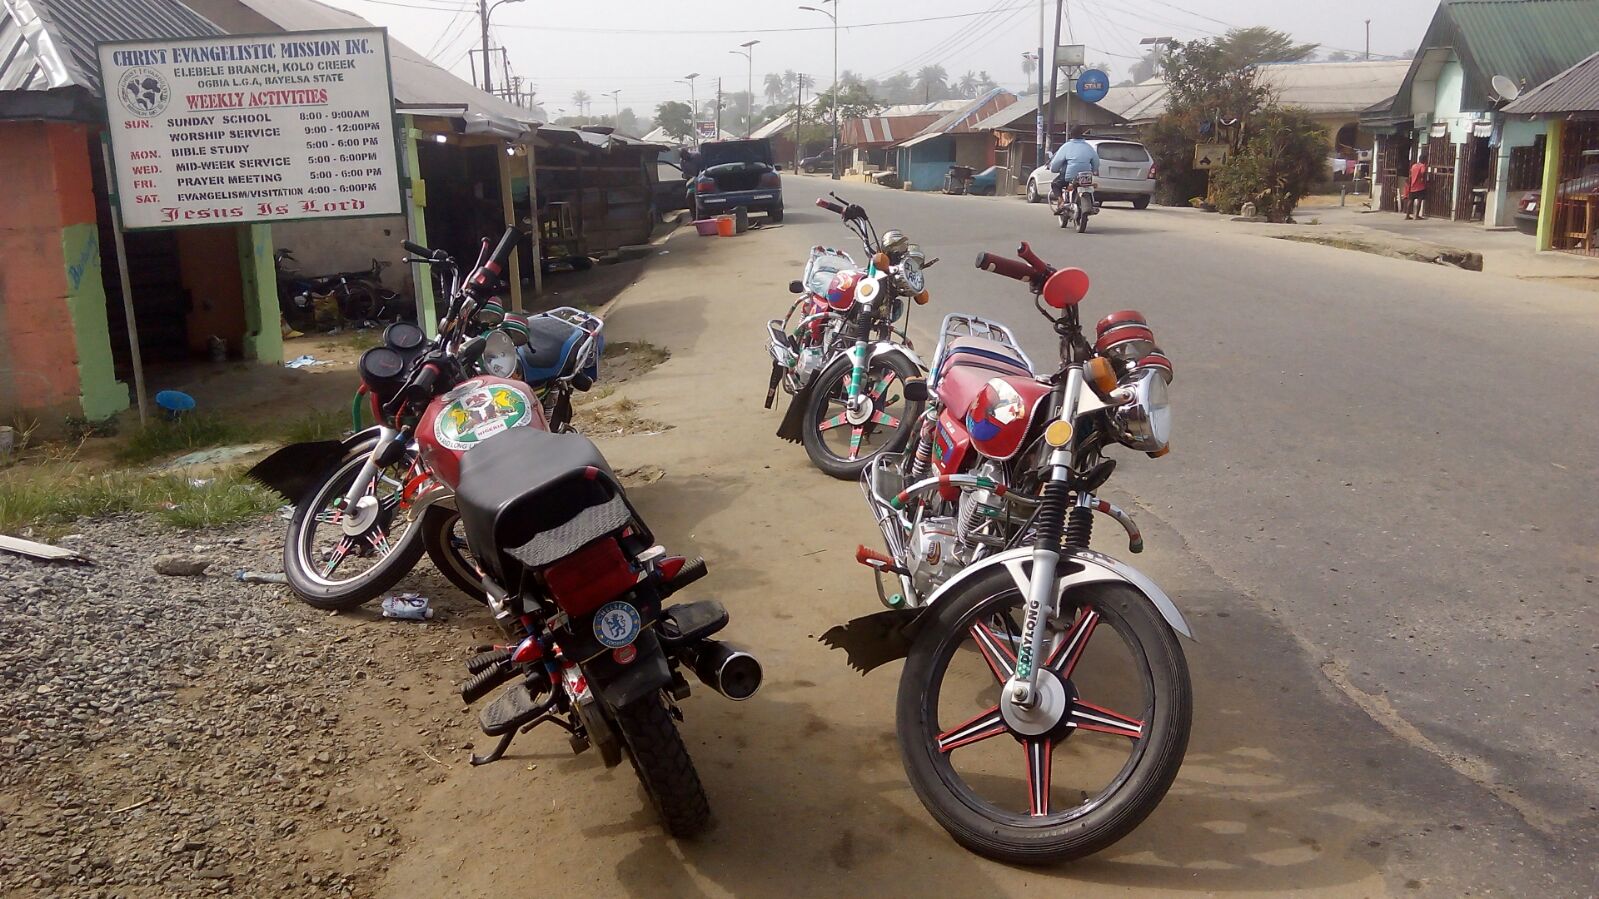 Troops block 73 men going to Imo with motorcycles from Nasarawa | TheCable